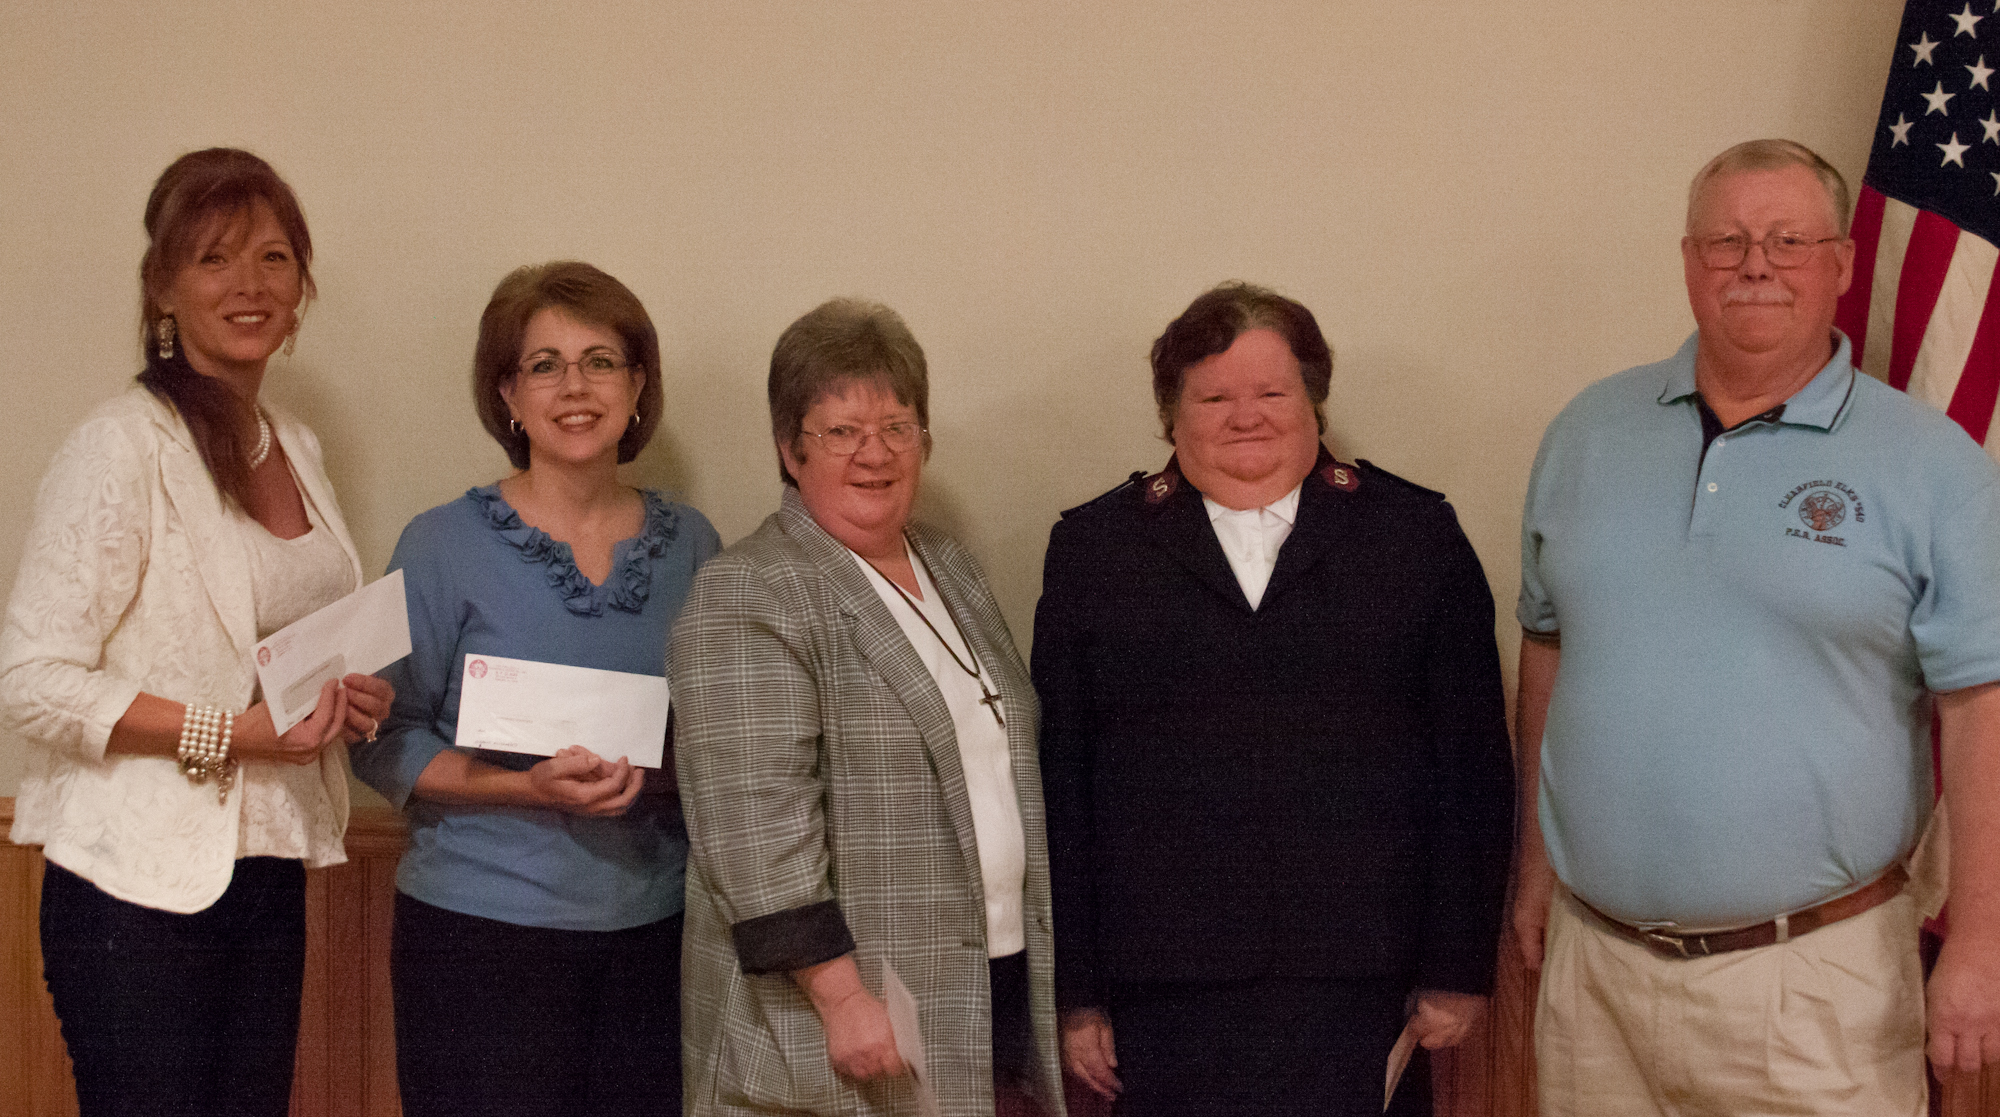 Pictured are organization representatives that received donations. From left to right, the reps are from Elks Christmas Parade, CAHS Music Boosters, Marian House, Salvation Army and the Elks' presenter Denny Flanagan.